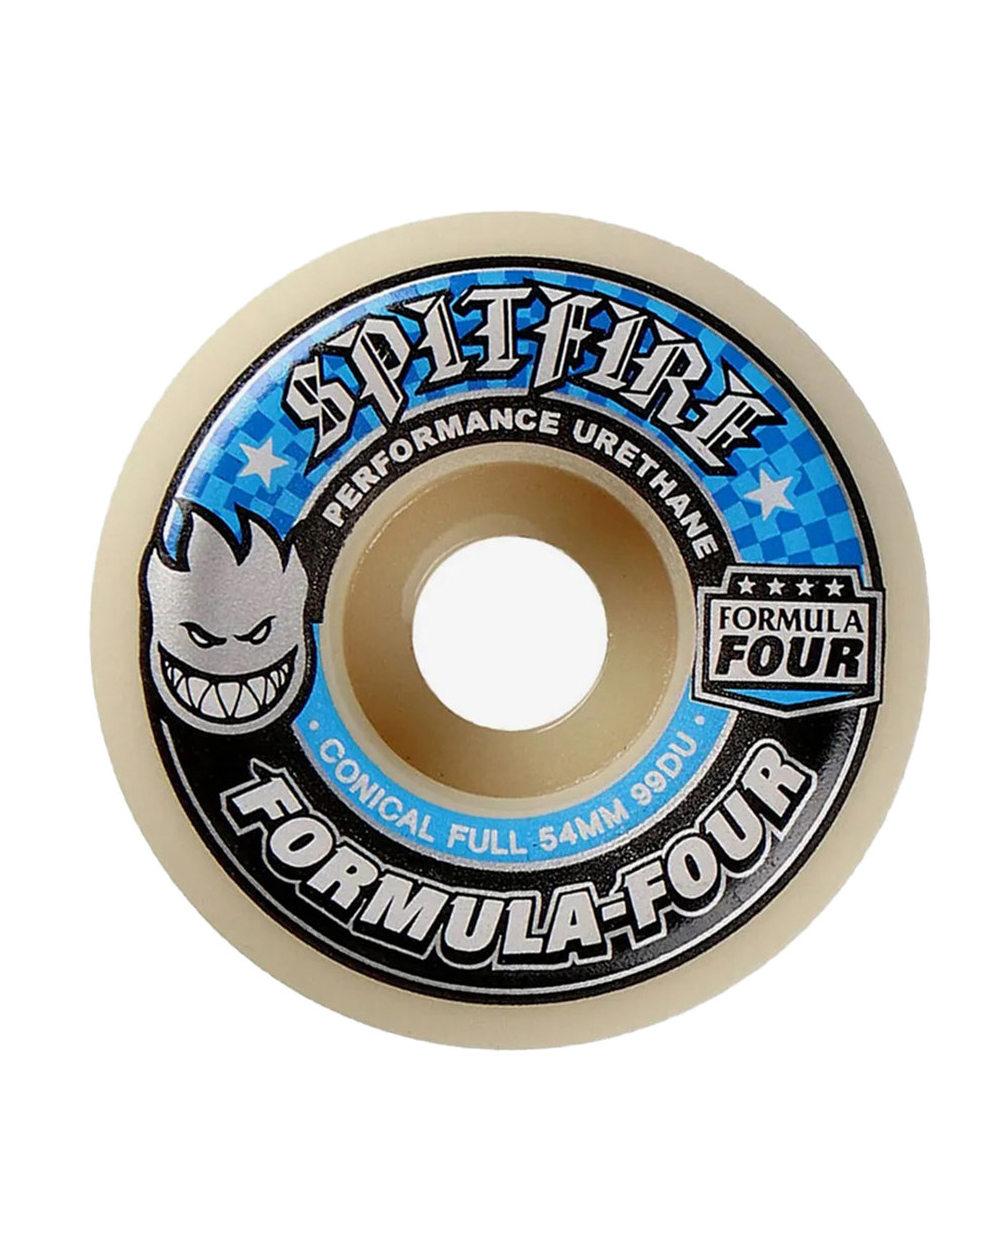 Spitfire Formula Four Conical Full 54mm 99A Skateboard Wheels pack of 4